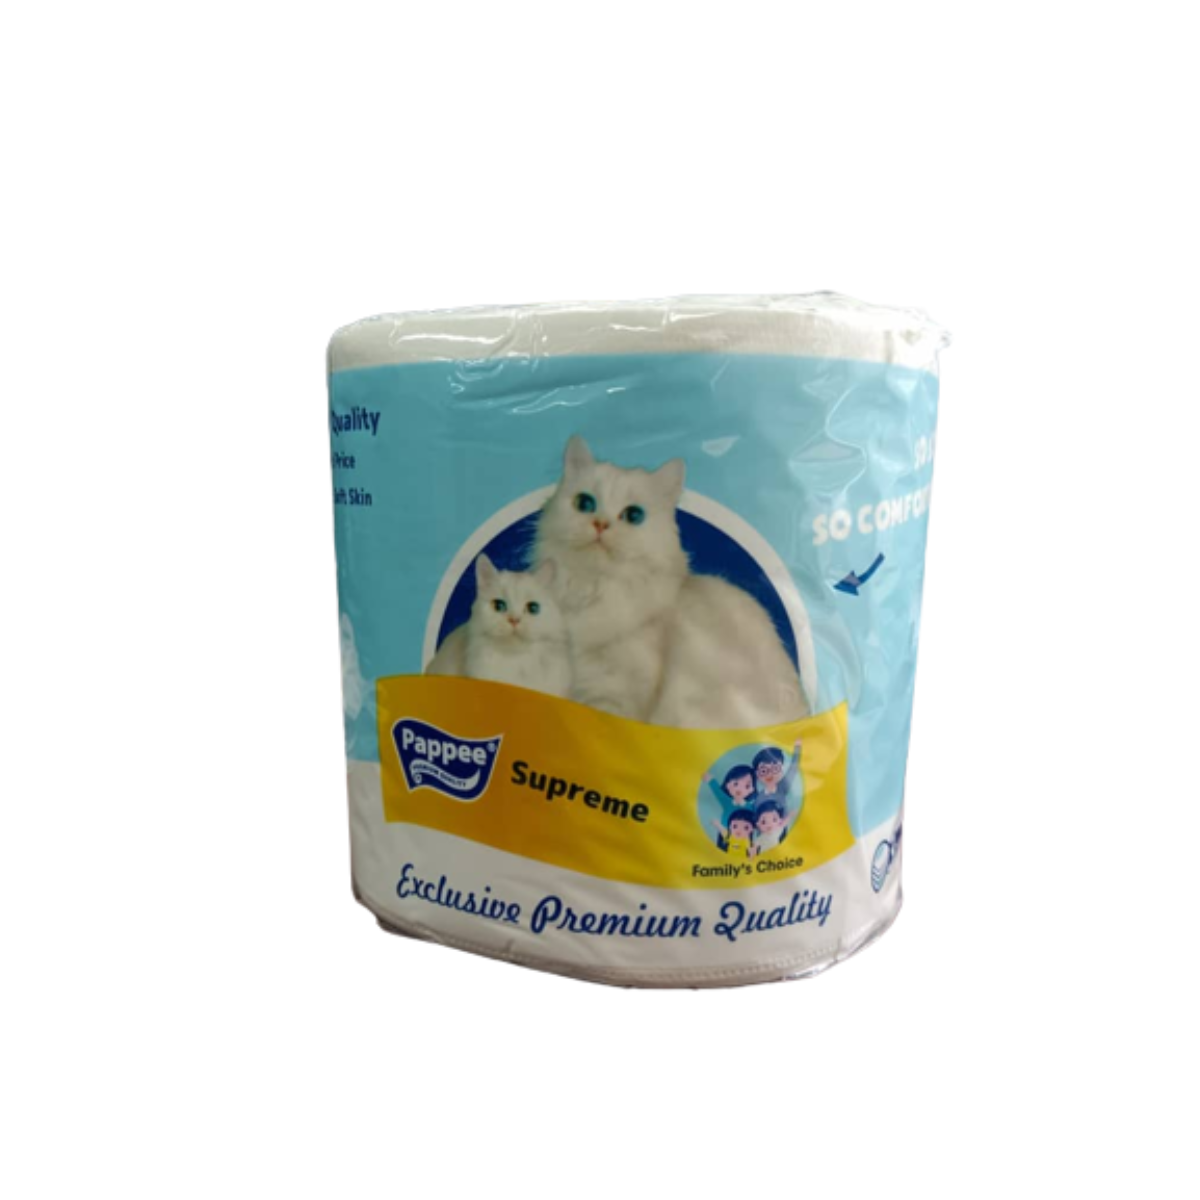 Pappee Exclusive Premium Quality Toilet Roll - So Soft - So Comfortable